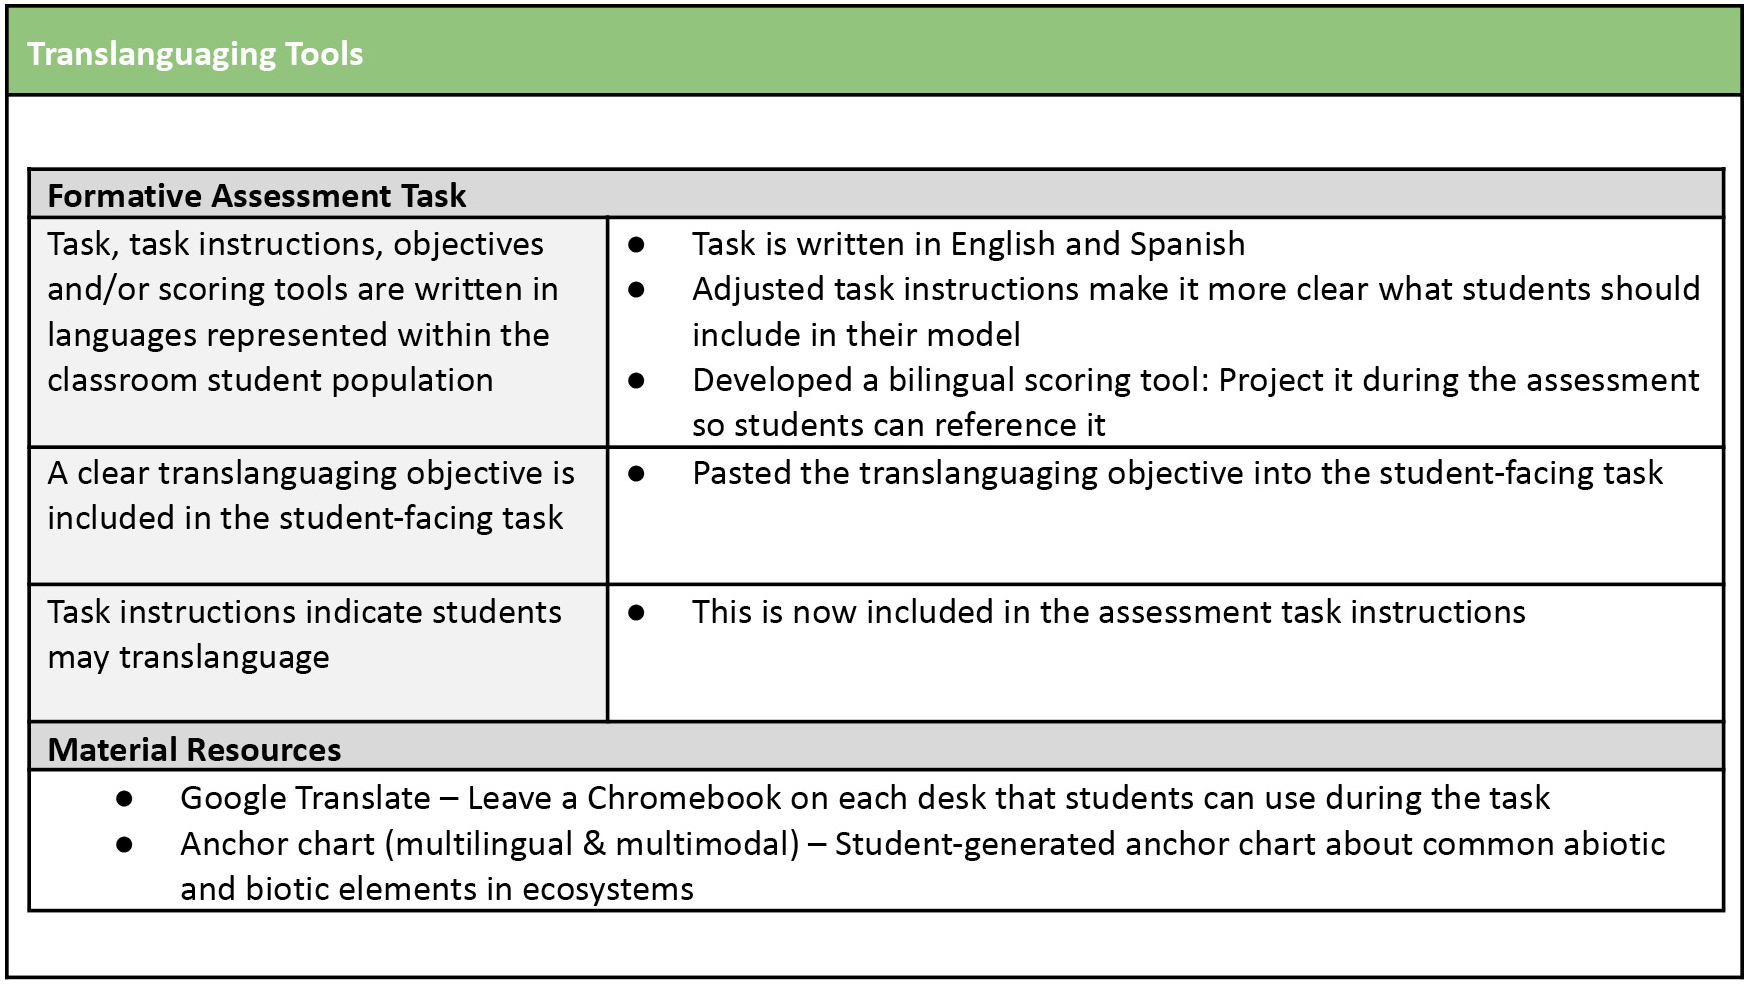 Figure 1 Example of planning translanguaging tools in ecosystems unit.